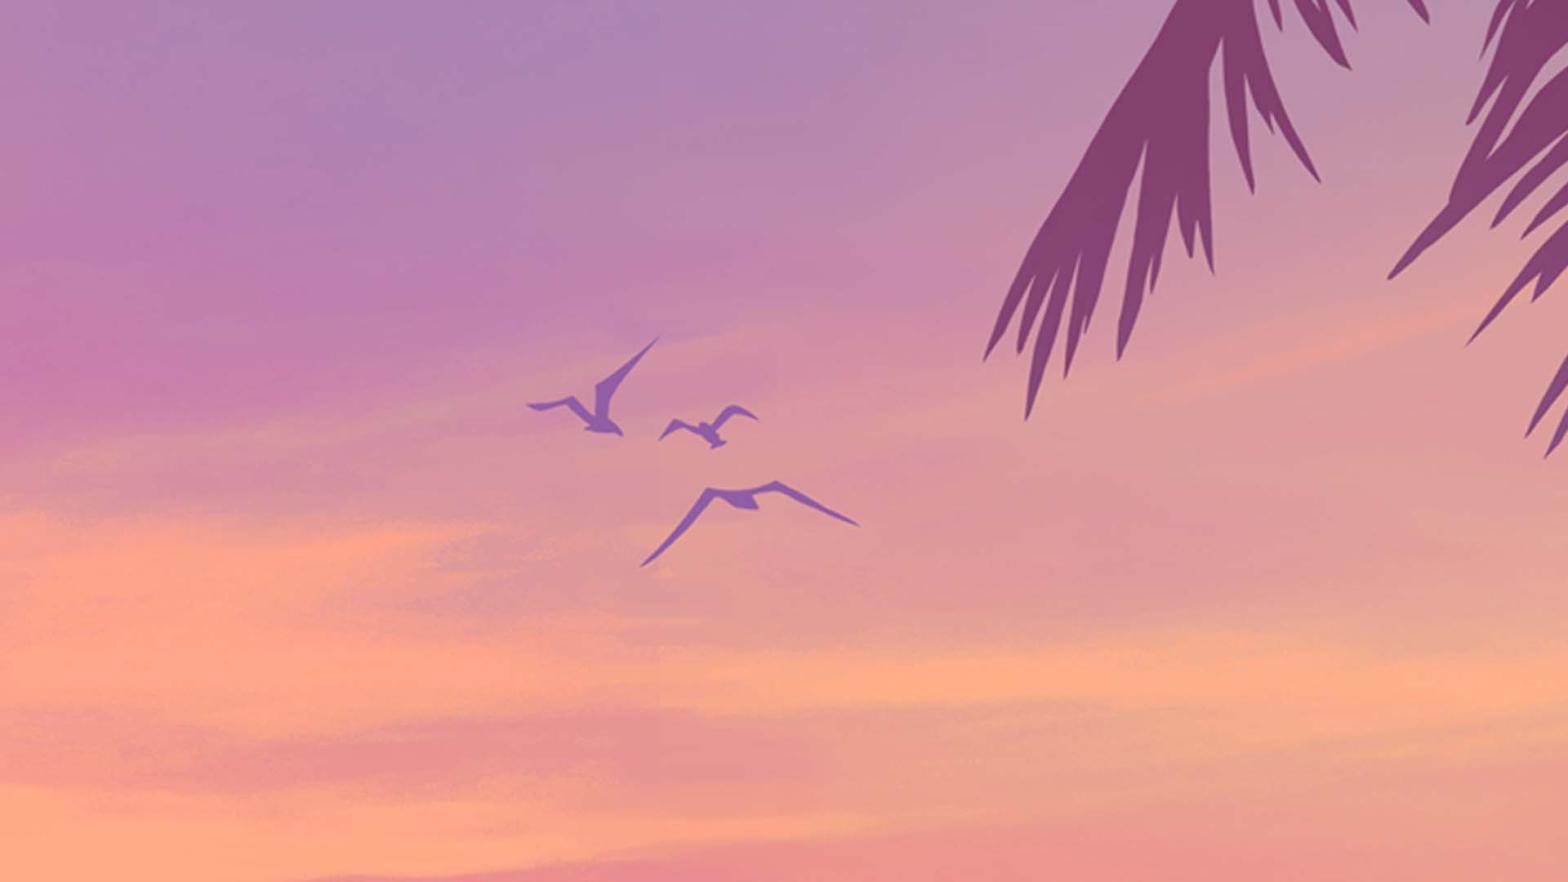 GTA 6’s Teaser Image Has Three Birds I Can’t Stop Thinking About